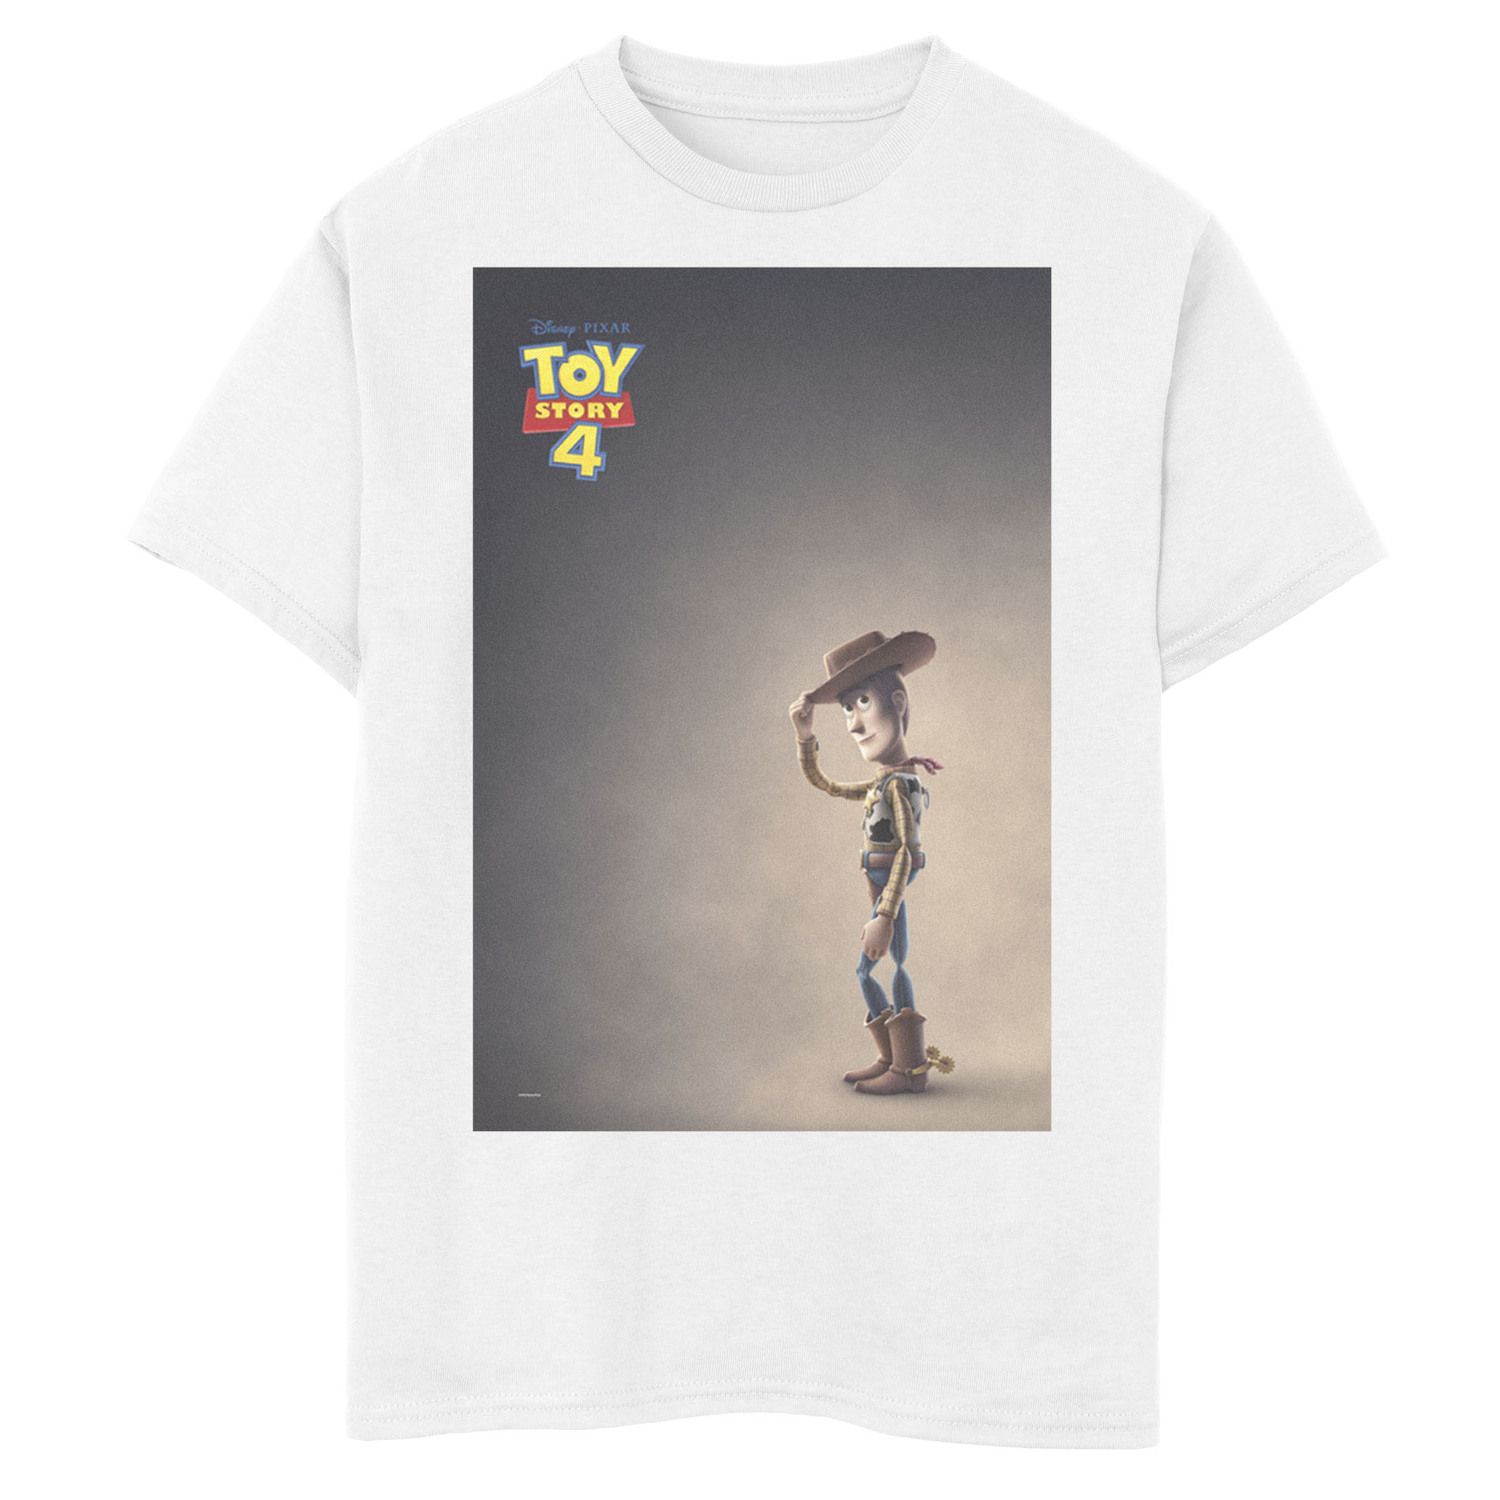 Image for Disney / Pixar 's Toy Story 4 Boys 8-20 Movie Poster Graphic Tee at Kohl's.